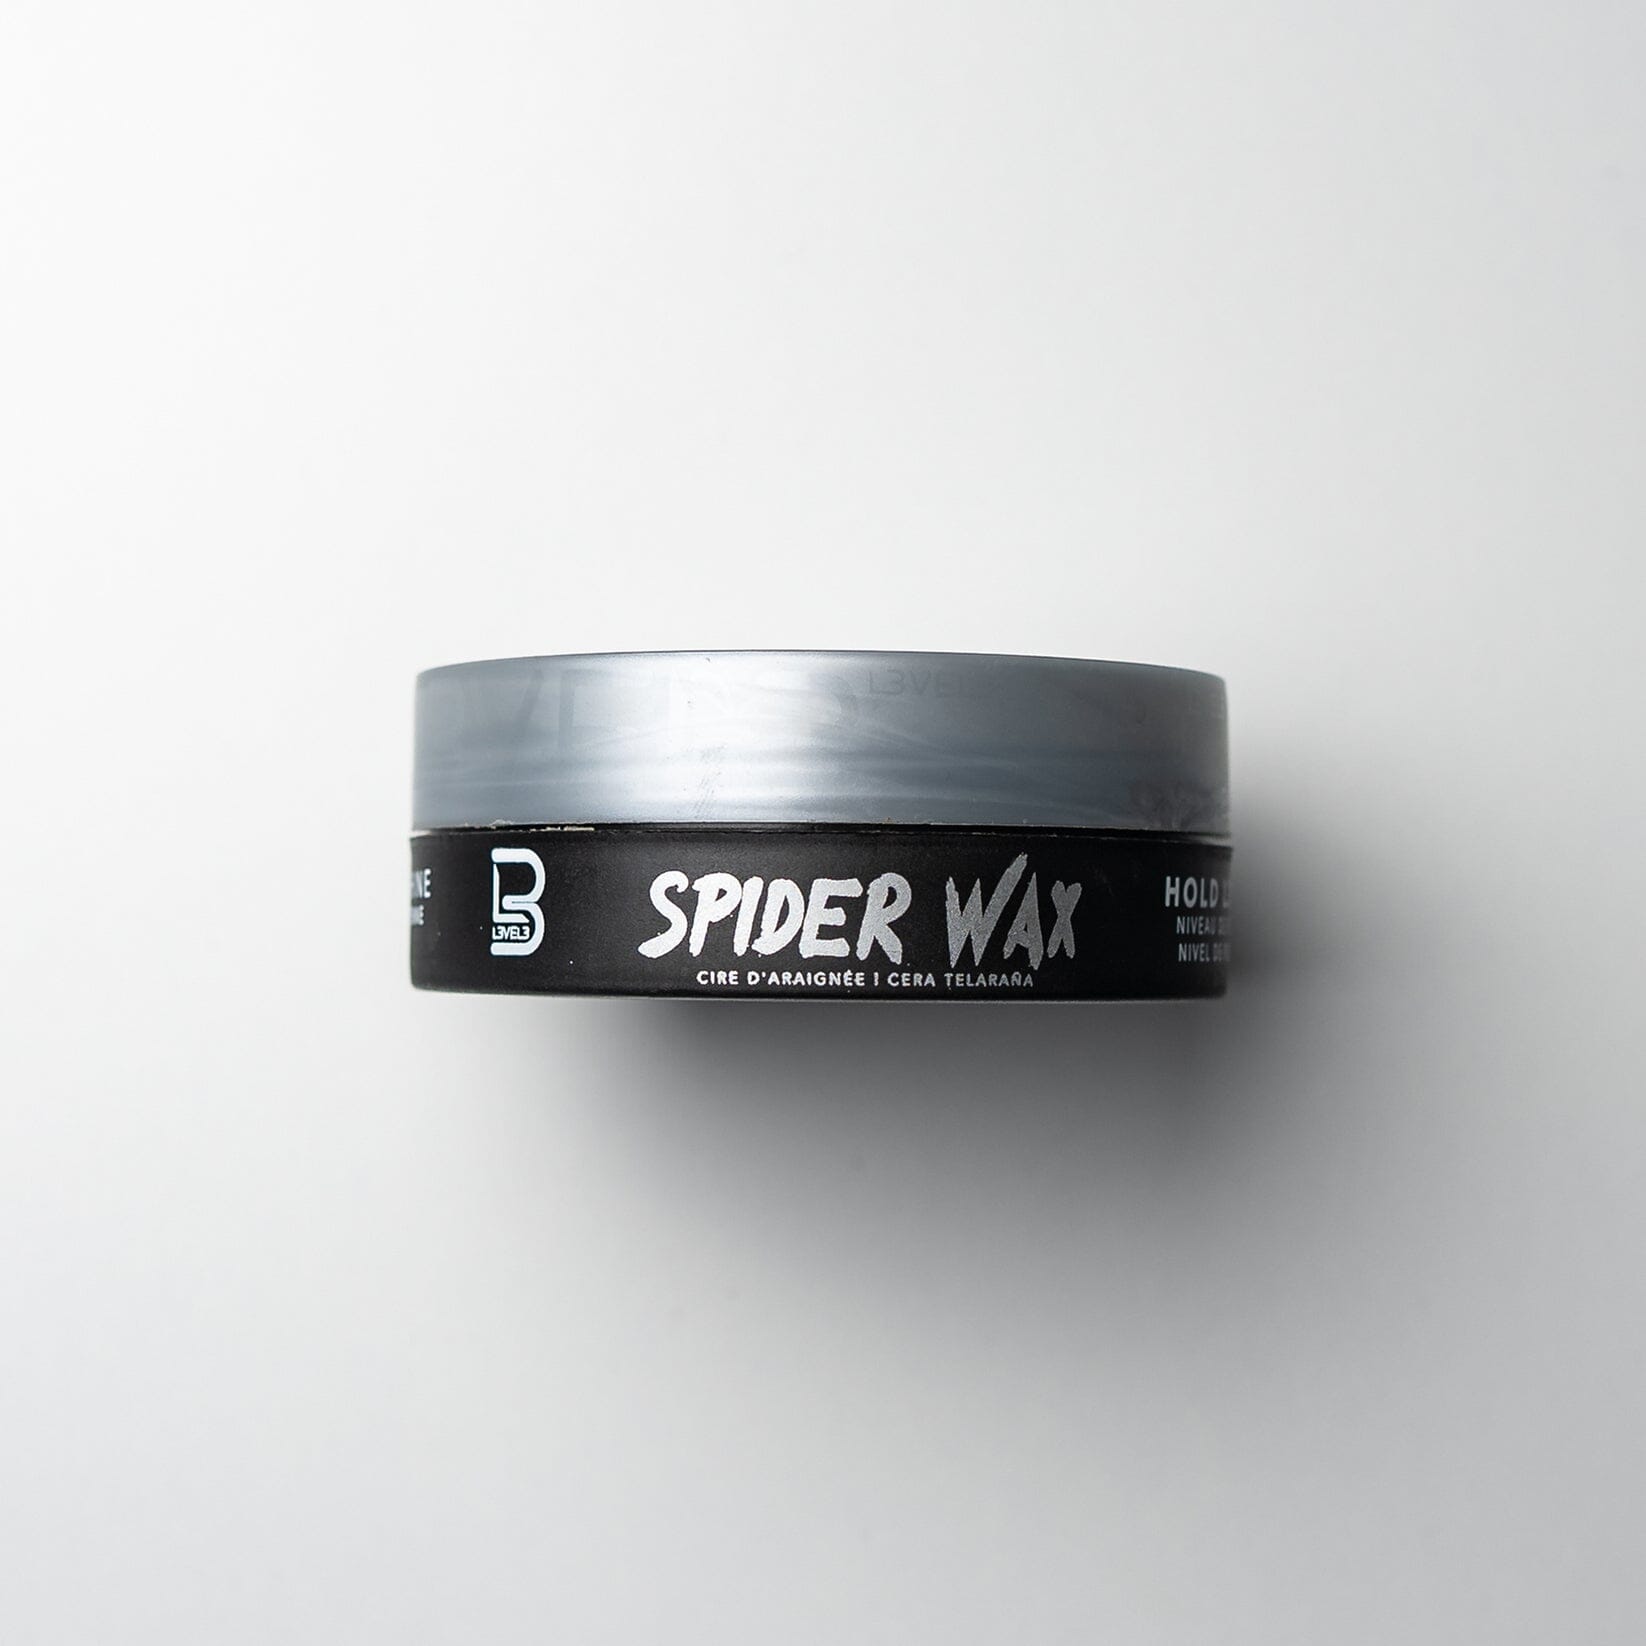 L3VEL3 Hair Styling Spider Wax 5.07oz (PC)